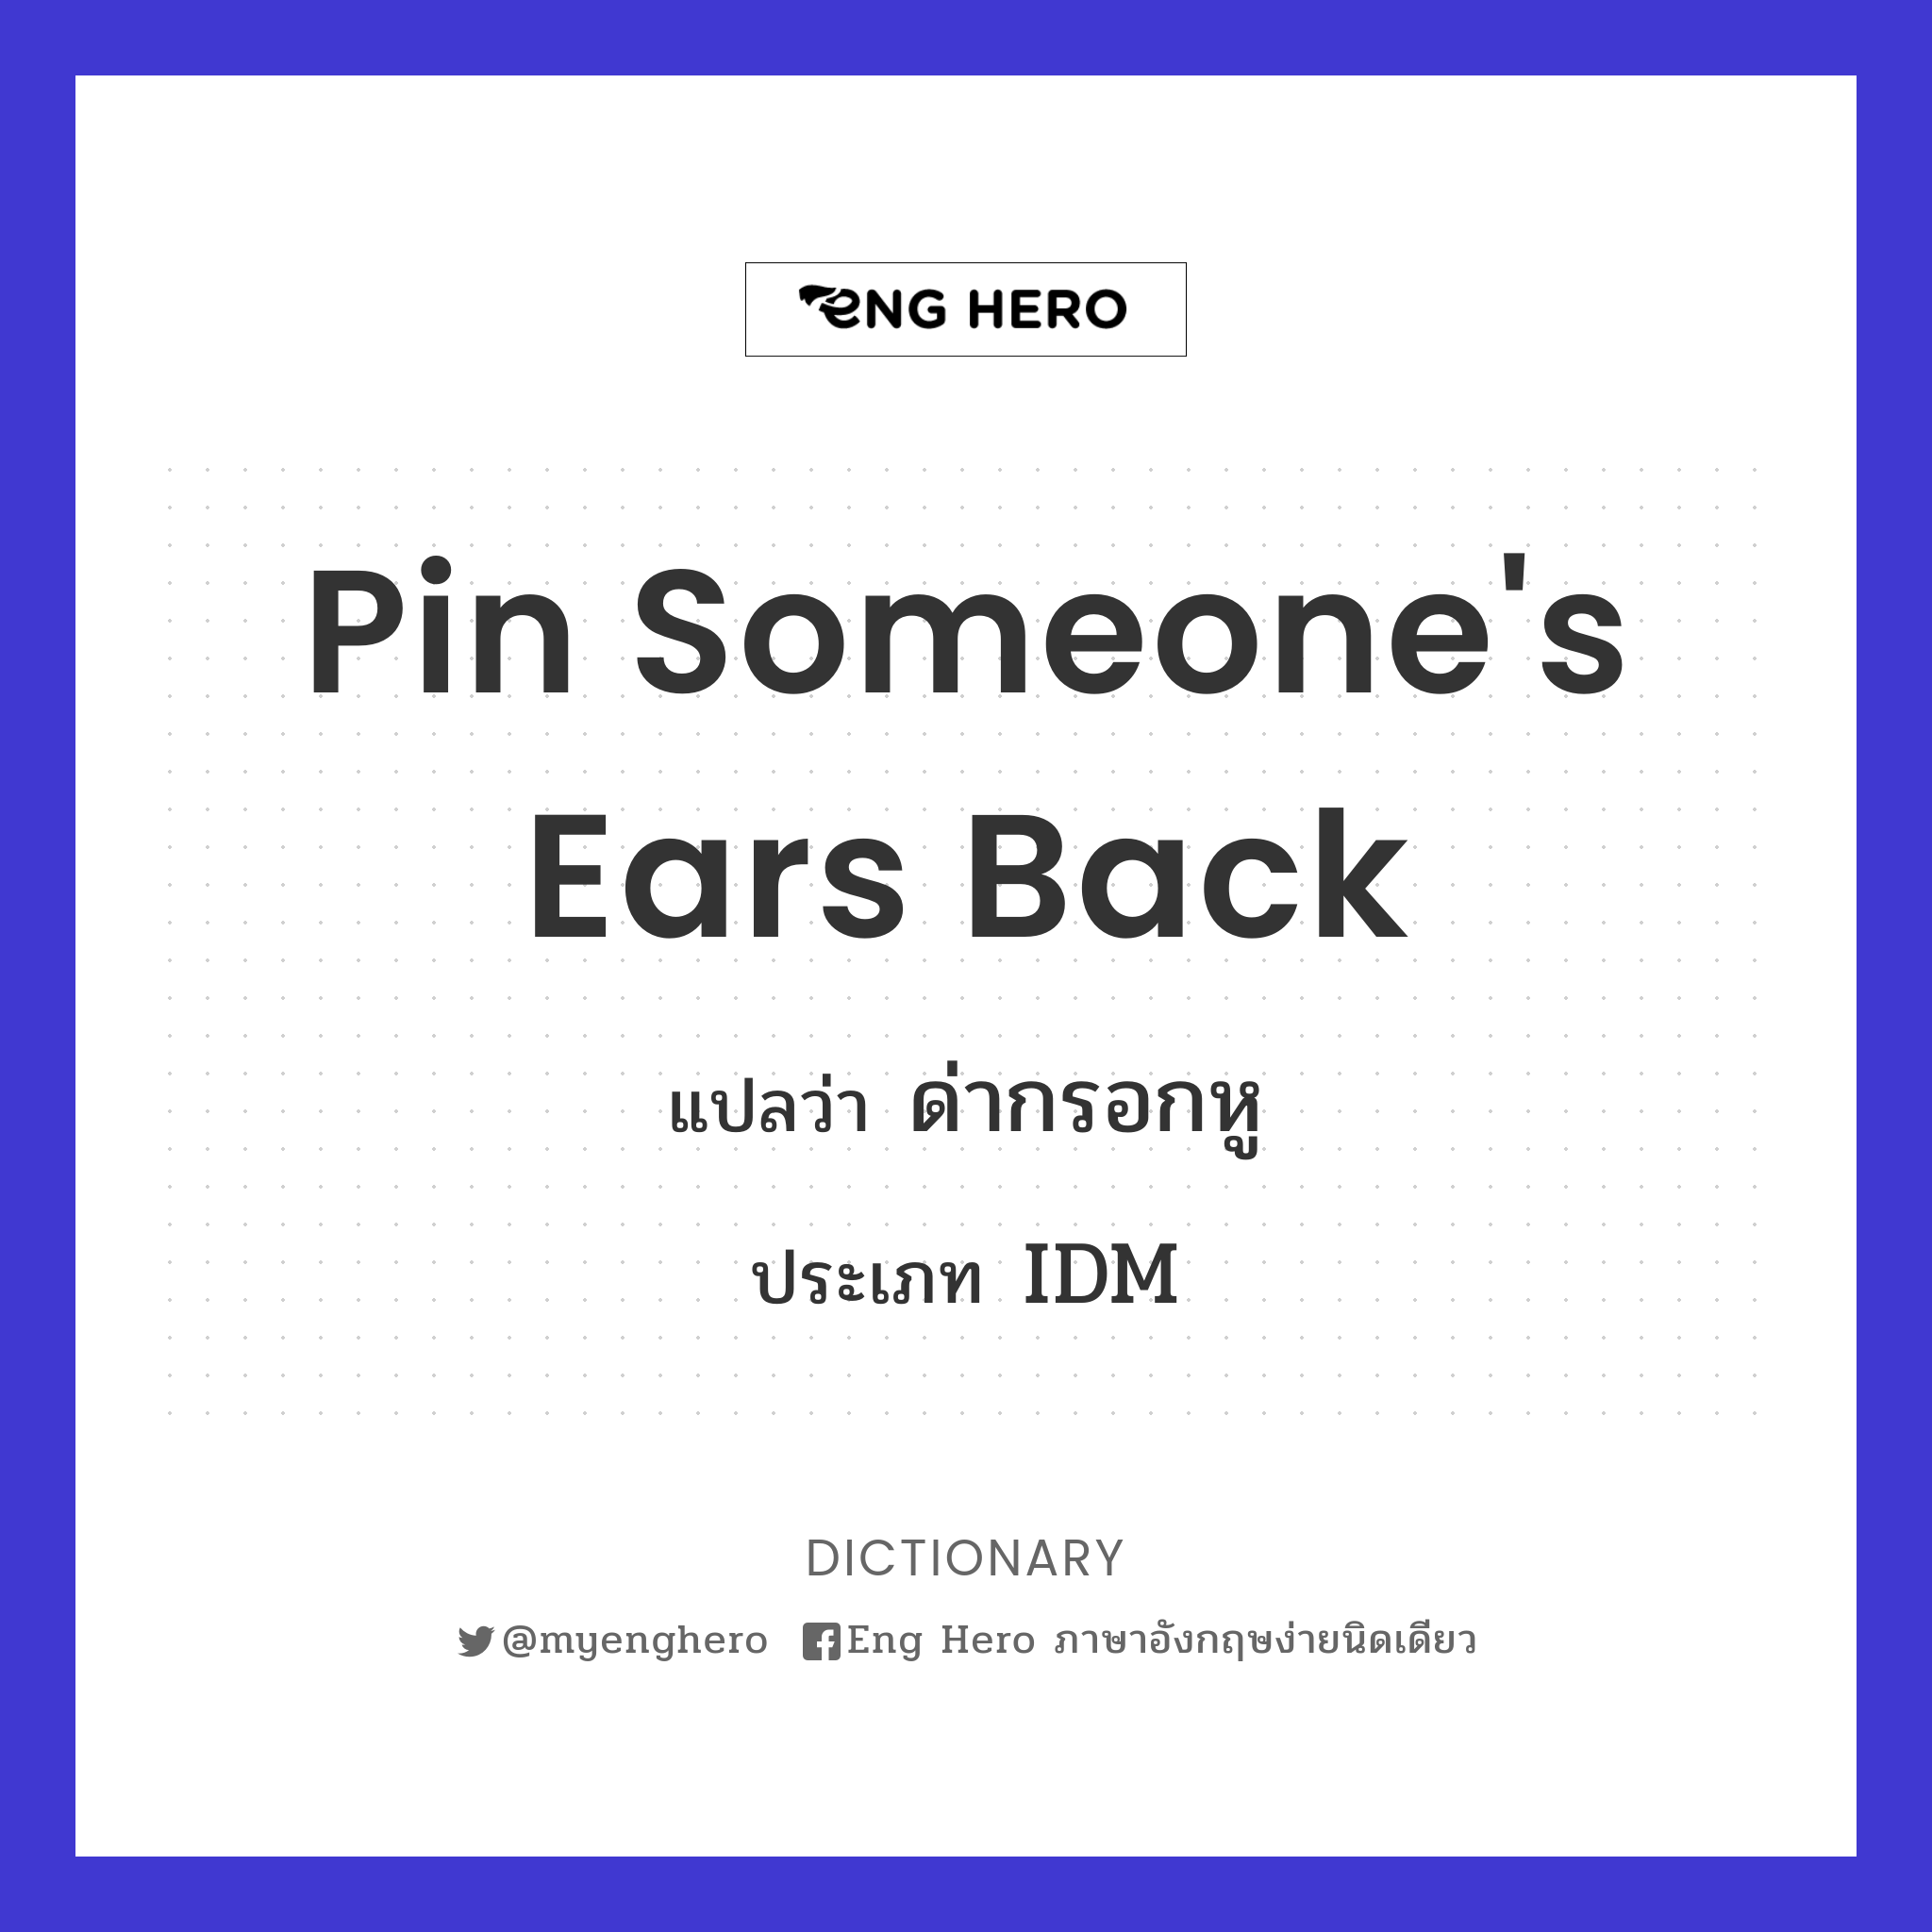 pin someone's ears back